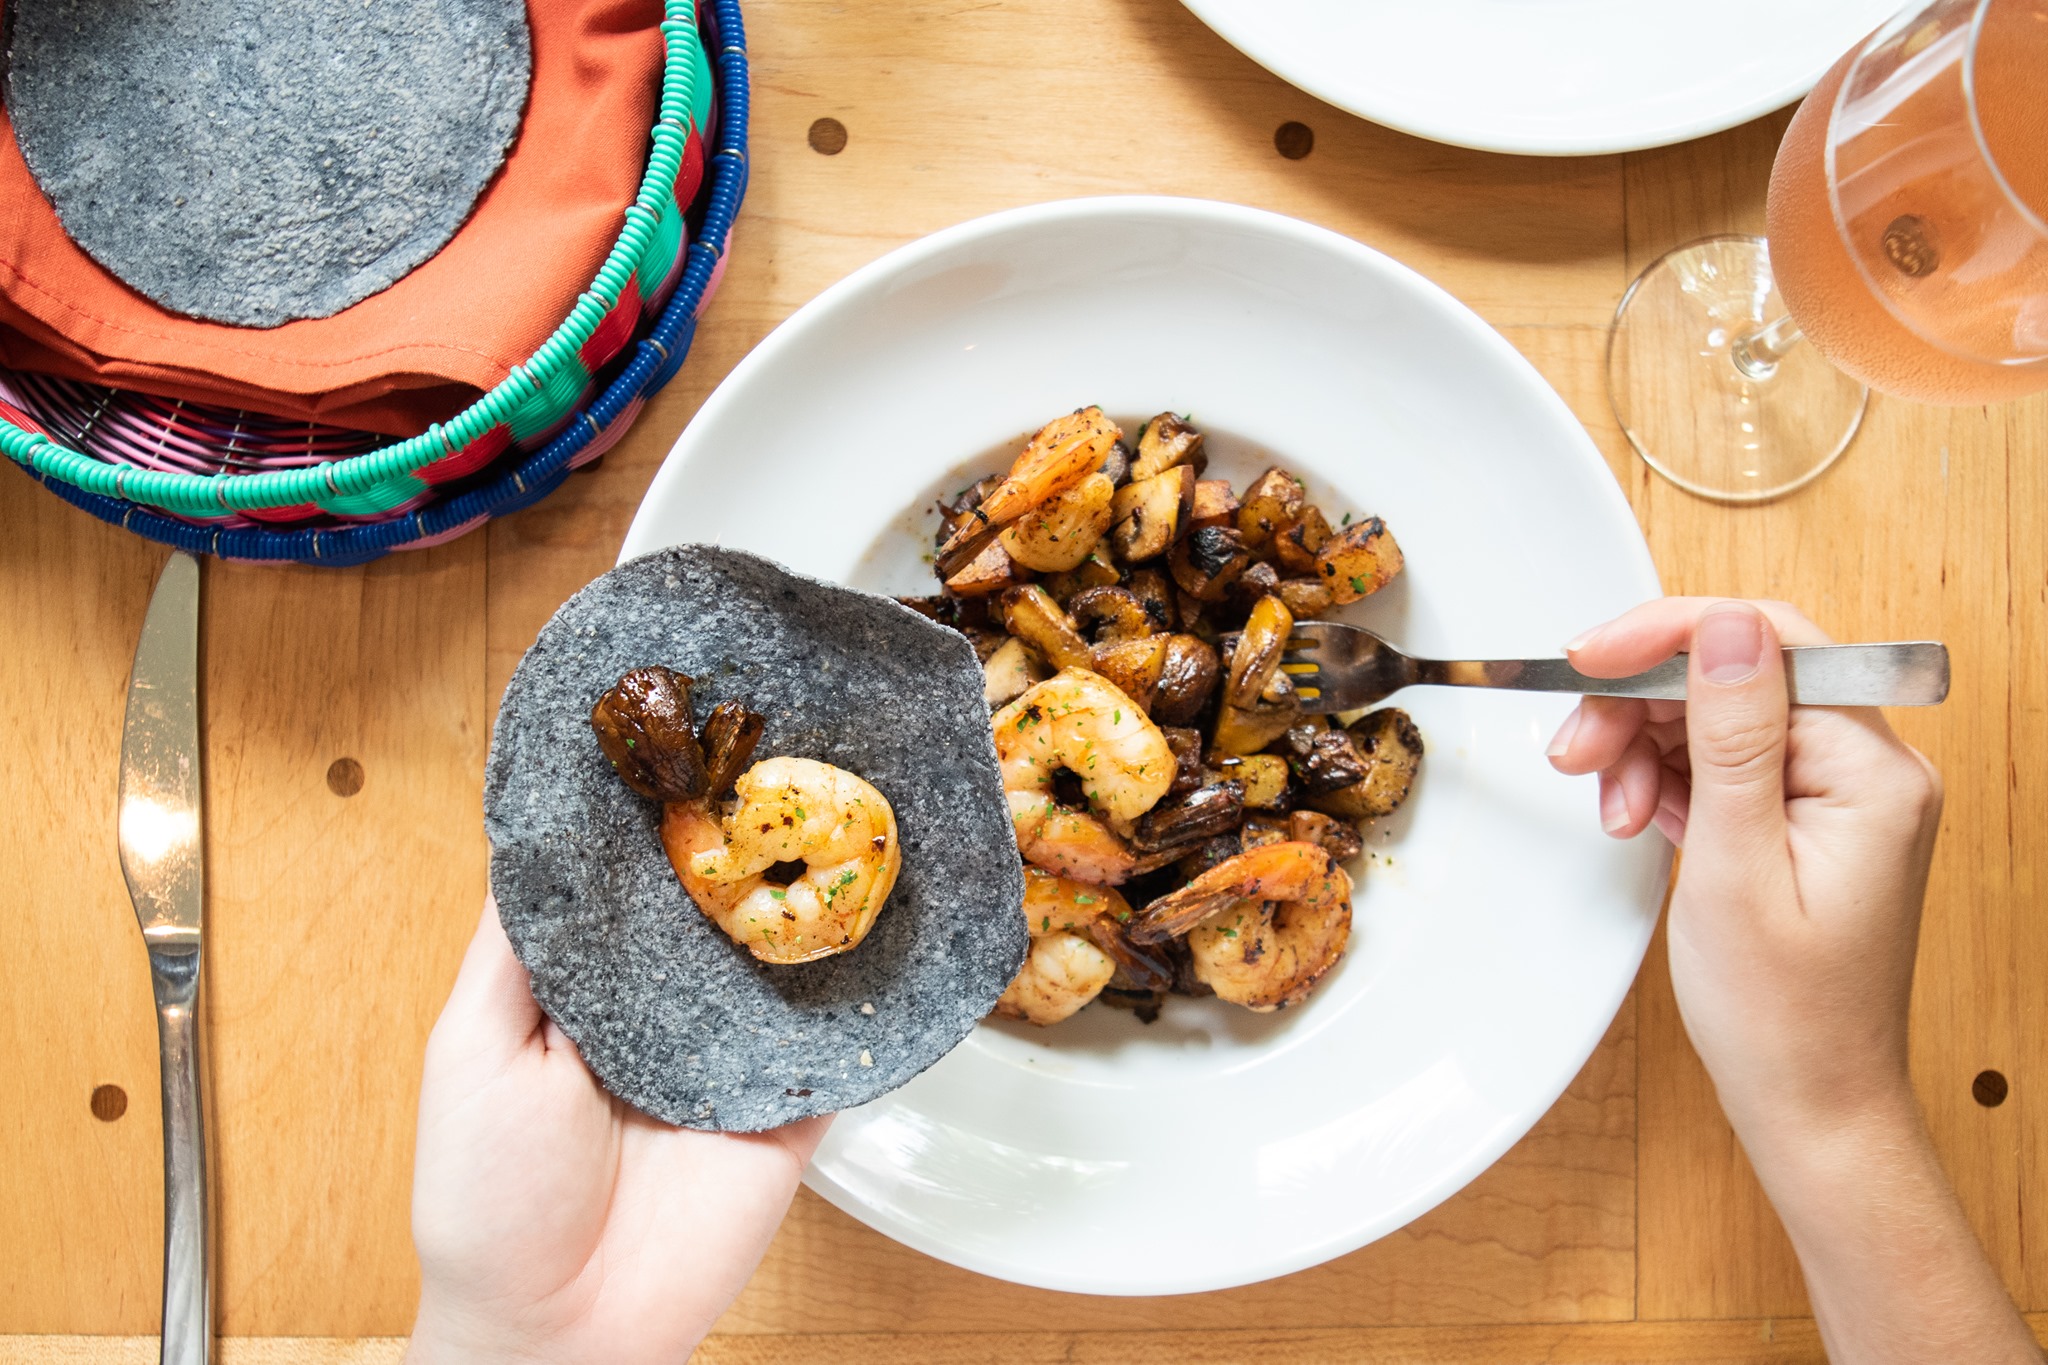 A person holding up a blue tortilla with a shrimp on it with one hand and spooning a bowl of shrimp with the other